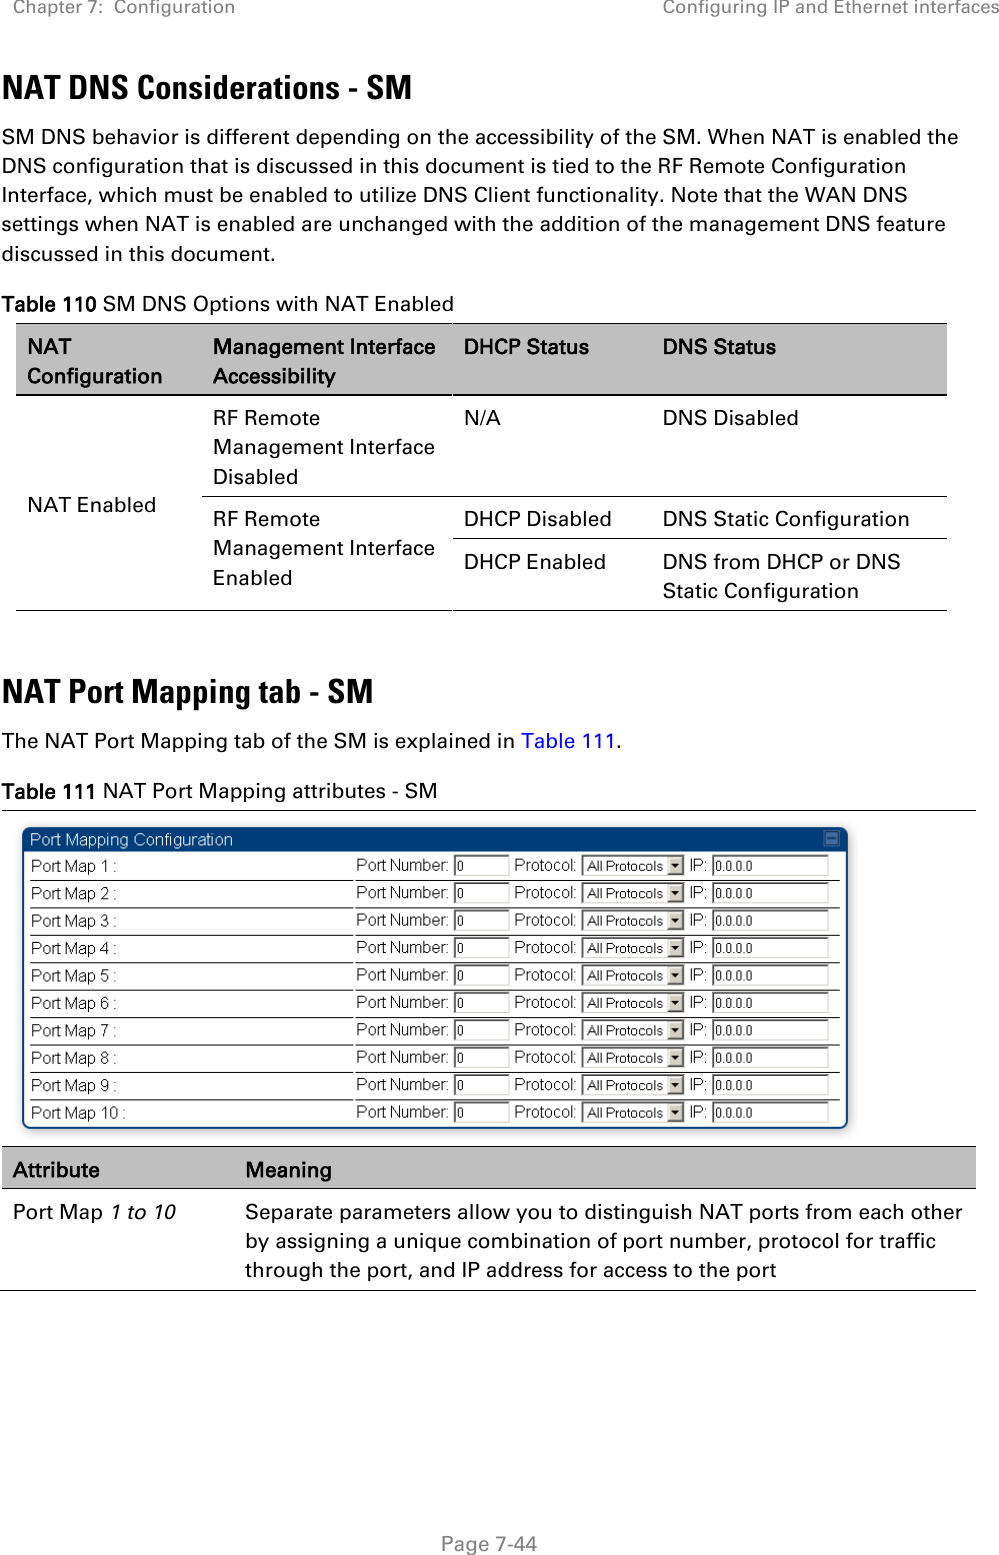 Chapter 7:  Configuration Configuring IP and Ethernet interfaces   Page 7-44 NAT DNS Considerations - SM SM DNS behavior is different depending on the accessibility of the SM. When NAT is enabled the DNS configuration that is discussed in this document is tied to the RF Remote Configuration Interface, which must be enabled to utilize DNS Client functionality. Note that the WAN DNS settings when NAT is enabled are unchanged with the addition of the management DNS feature discussed in this document.  Table 110 SM DNS Options with NAT Enabled NAT Configuration Management Interface Accessibility DHCP Status DNS Status NAT Enabled RF Remote Management Interface Disabled N/A DNS Disabled RF Remote Management Interface Enabled DHCP Disabled DNS Static Configuration DHCP Enabled DNS from DHCP or DNS Static Configuration  NAT Port Mapping tab - SM The NAT Port Mapping tab of the SM is explained in Table 111. Table 111 NAT Port Mapping attributes - SM  Attribute Meaning Port Map 1 to 10 Separate parameters allow you to distinguish NAT ports from each other by assigning a unique combination of port number, protocol for traffic through the port, and IP address for access to the port   